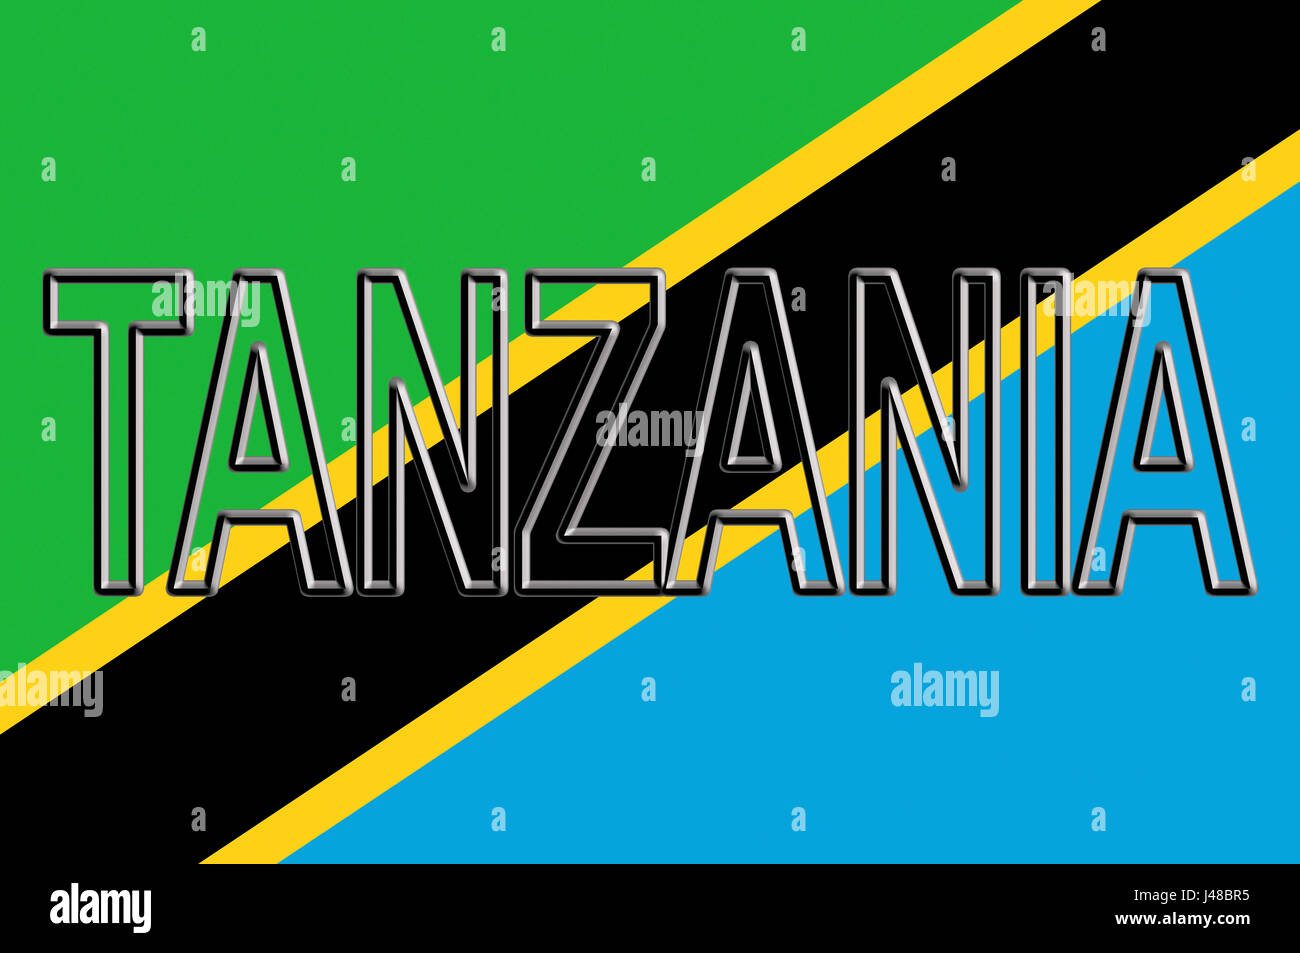 Illustration of the national flag of Tanzania with the country written on the flag. Stock Photo